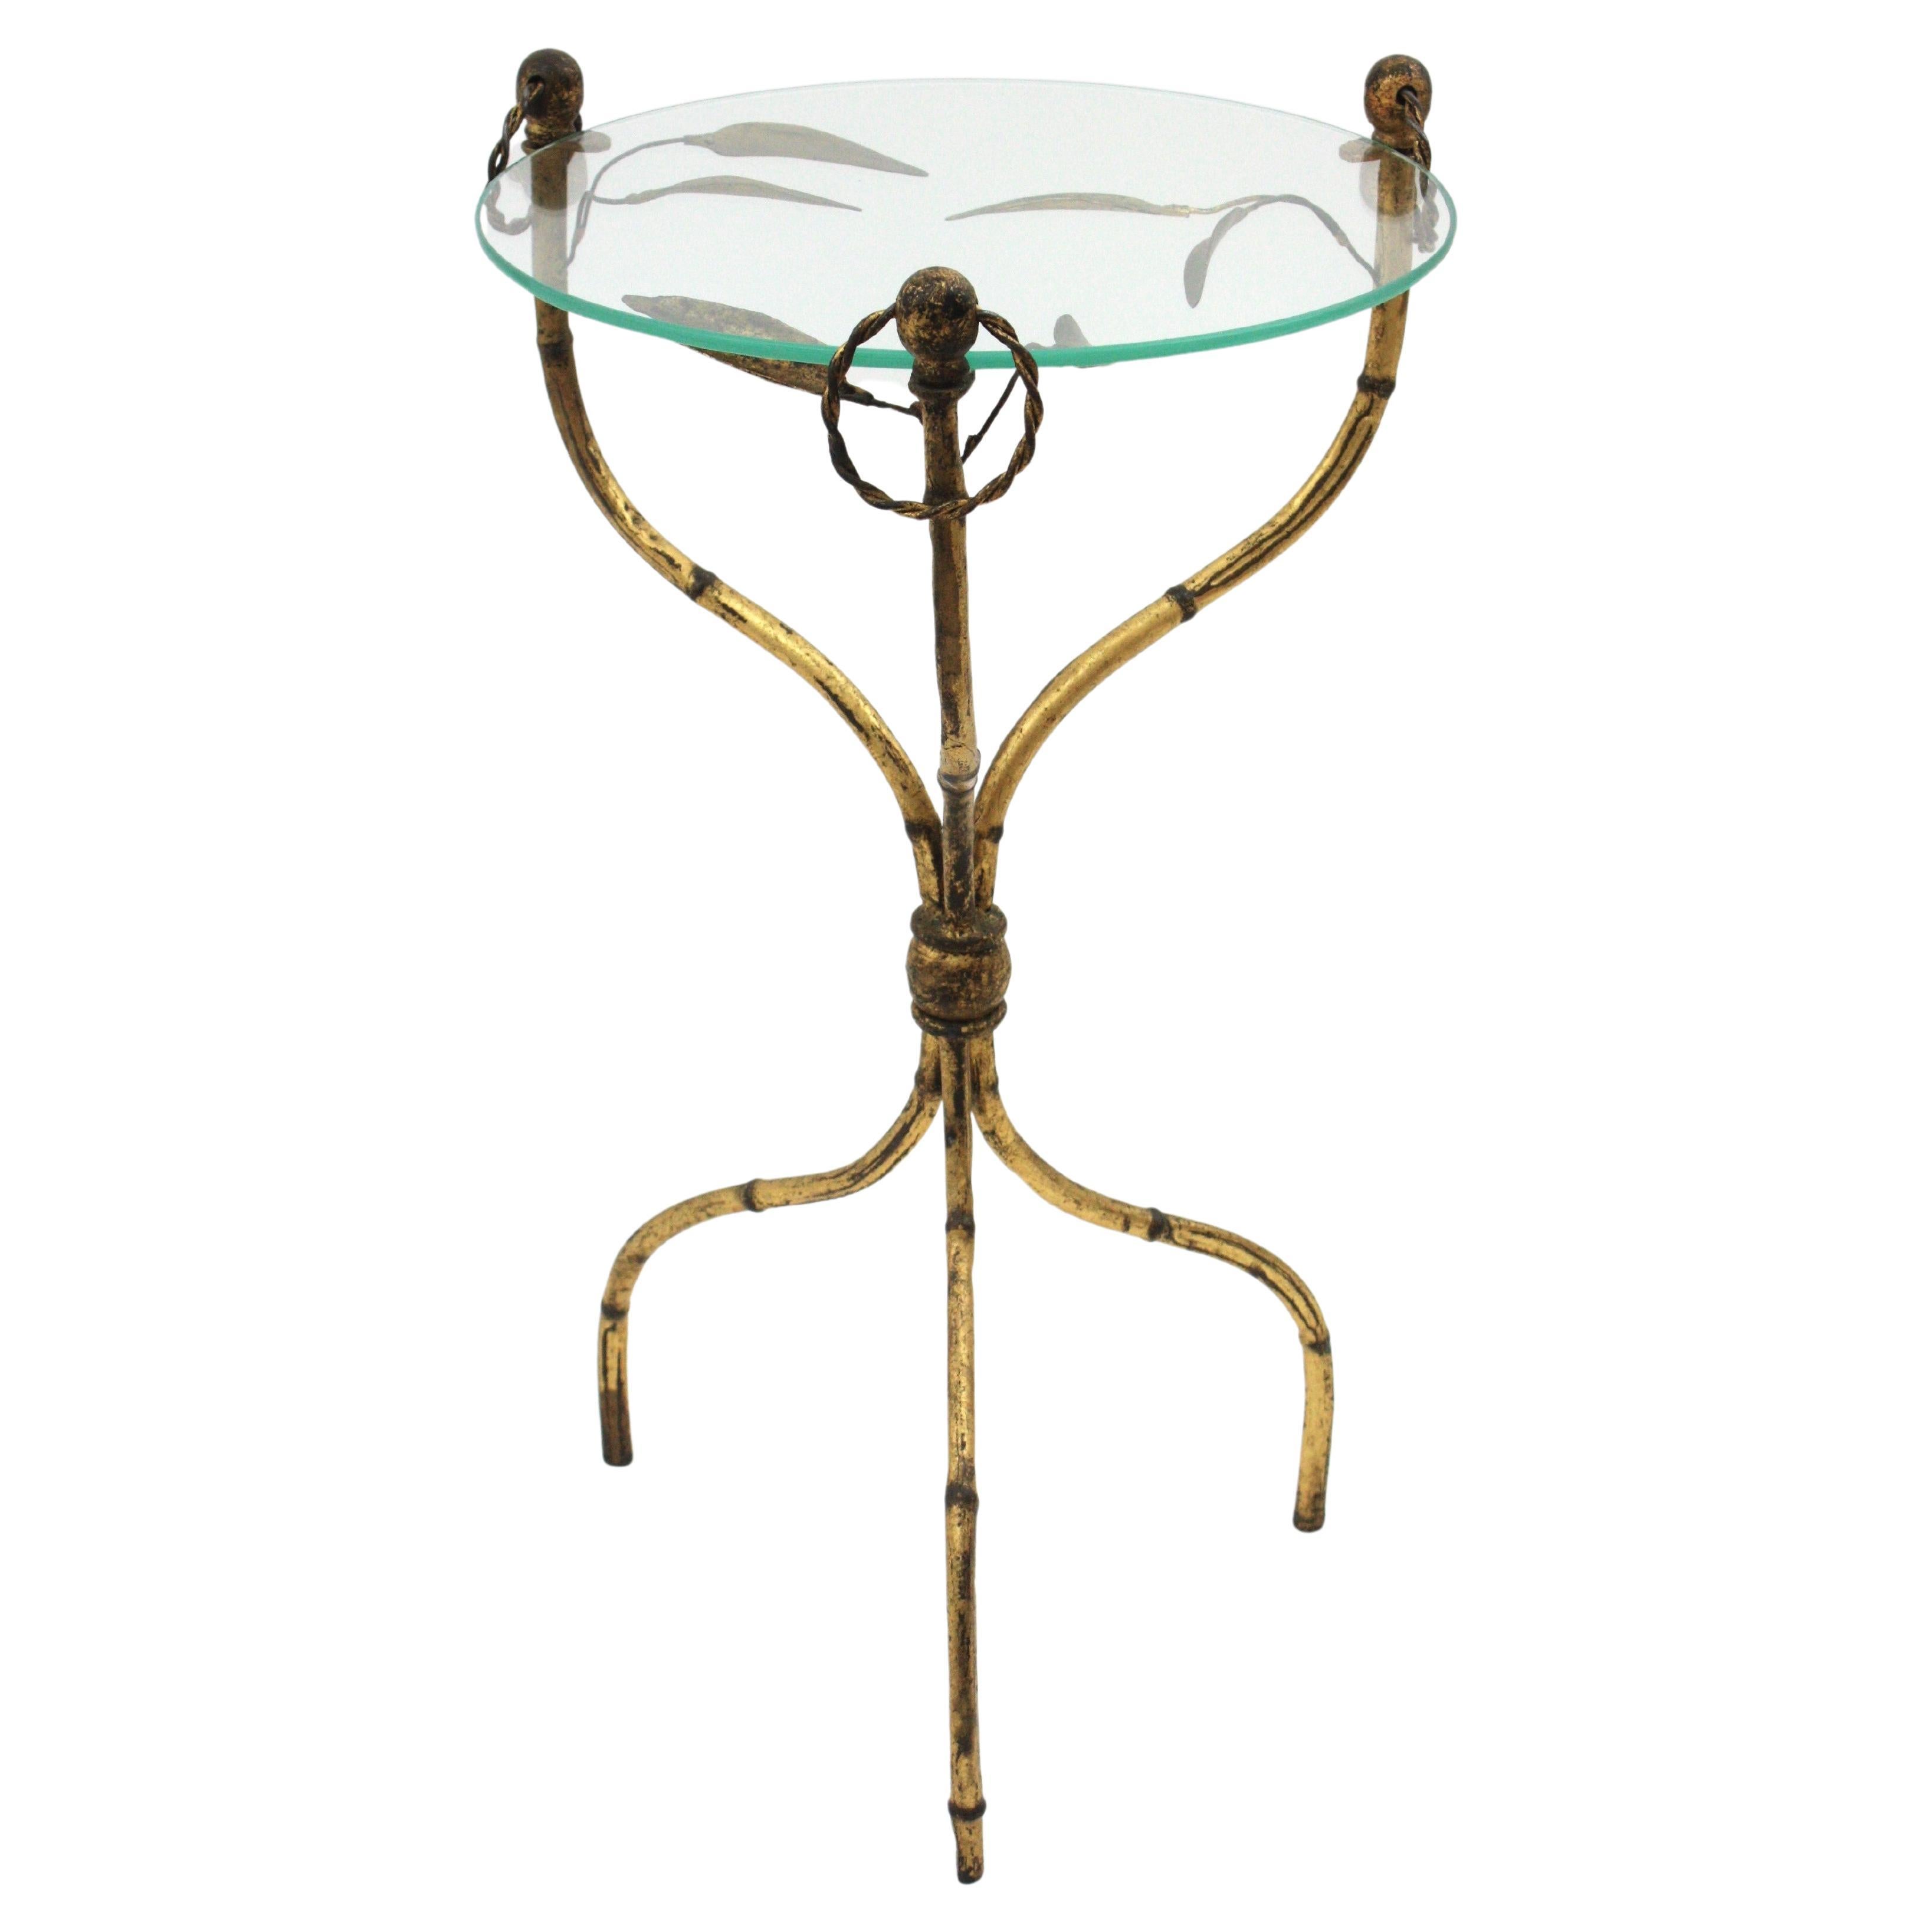 Eye-catching Hollywood Regency gilt iron faux bamboo gueridon drinks table with foliage details, France, 1950s. 
In the manner of Maison Baguès.
This beautiful round table stands up on three legs with a beautiful faux bamboo design. Leaf decorations